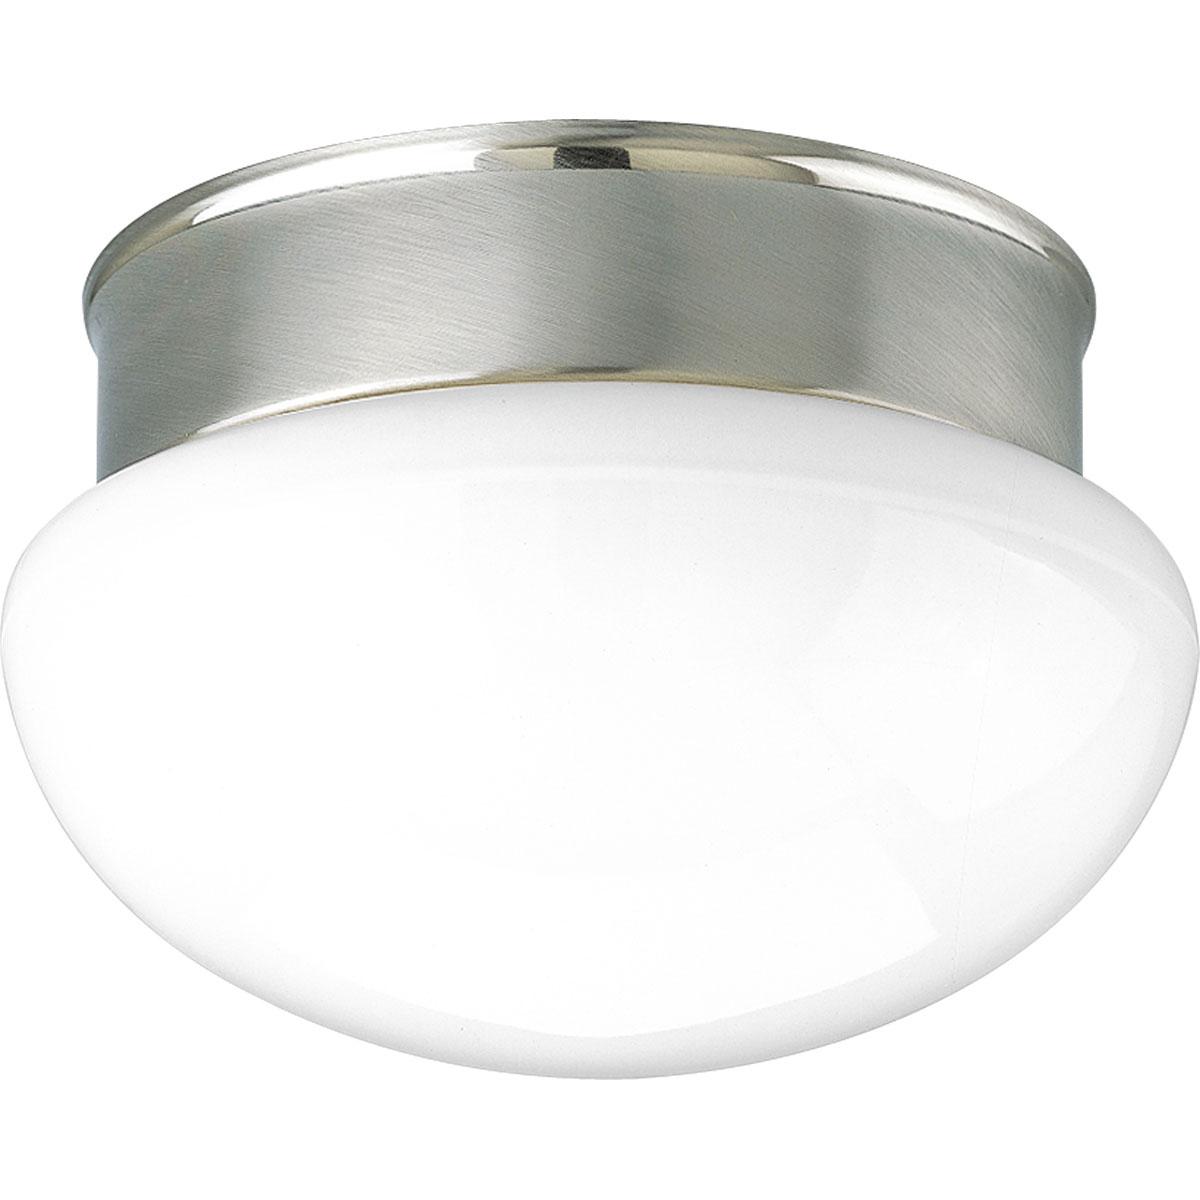 Hubbell P3410-09 A traditional two-light close-to-ceiling fixture featuring a White glass bowl and a Brushed Nickel finish. The fixture is ideal in a bathroom setting or hall/foyer.  ; Brushed Nickel finish. ; White glass bowl. ; Steel construction. ; Requires two (2) 60-